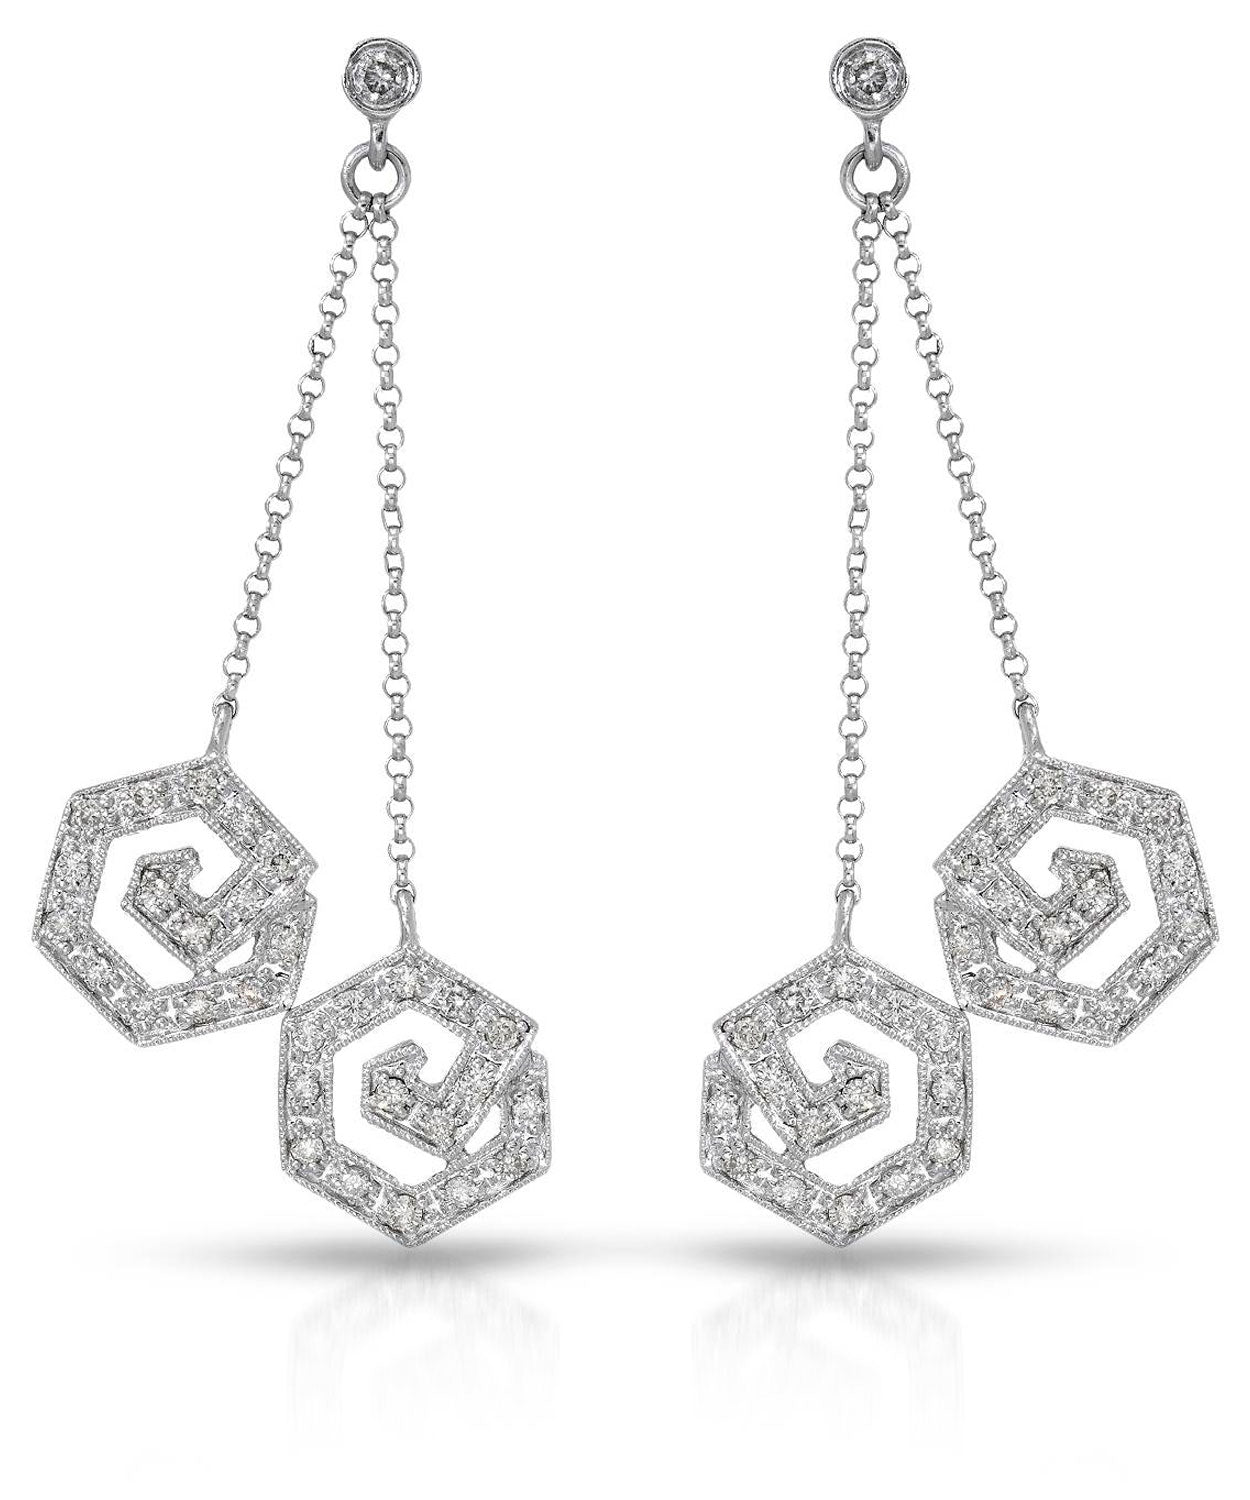 Allure Collection 0.62 ctw Diamond 14k White Gold Dangle Earrings View 1